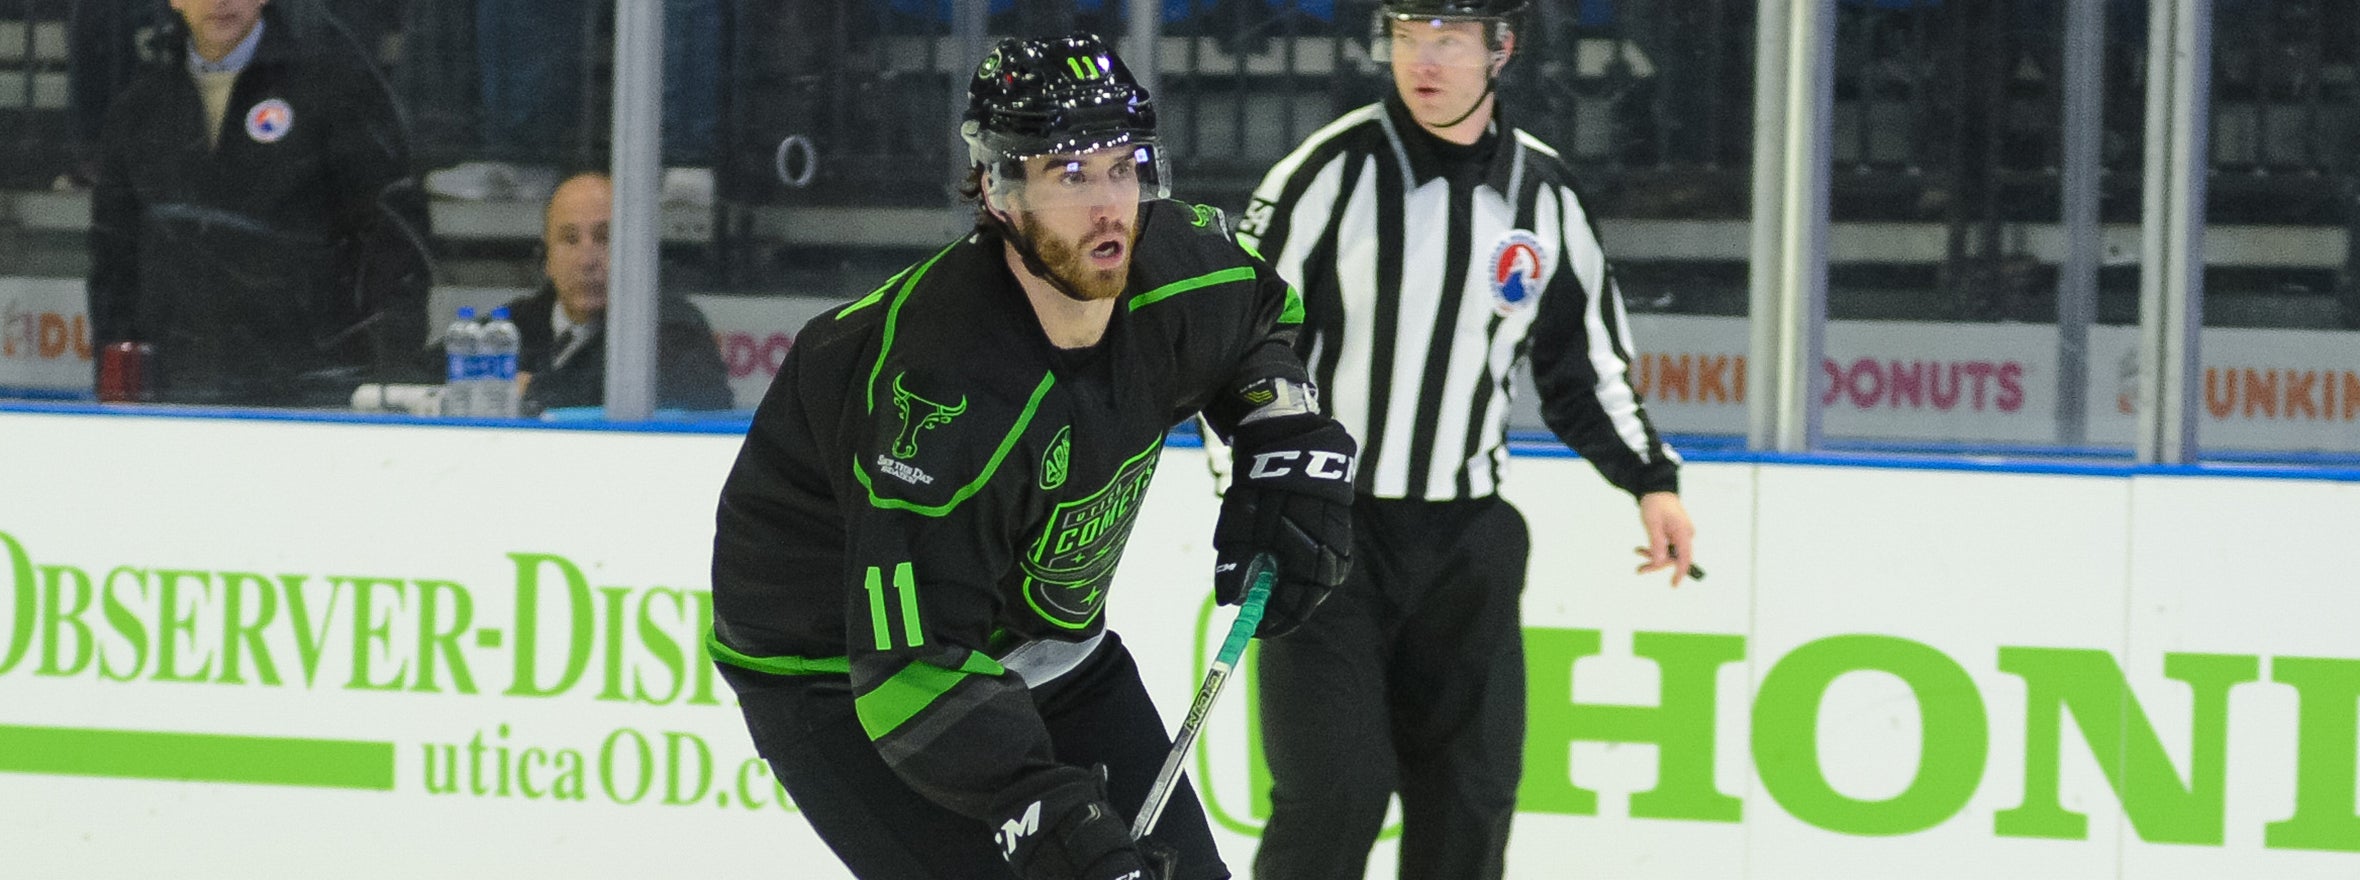 COMETS ALLOW FIVE UNANSWERED GOALS IN LOSS TO BELLEVILLE | Utica Comets Official Website 